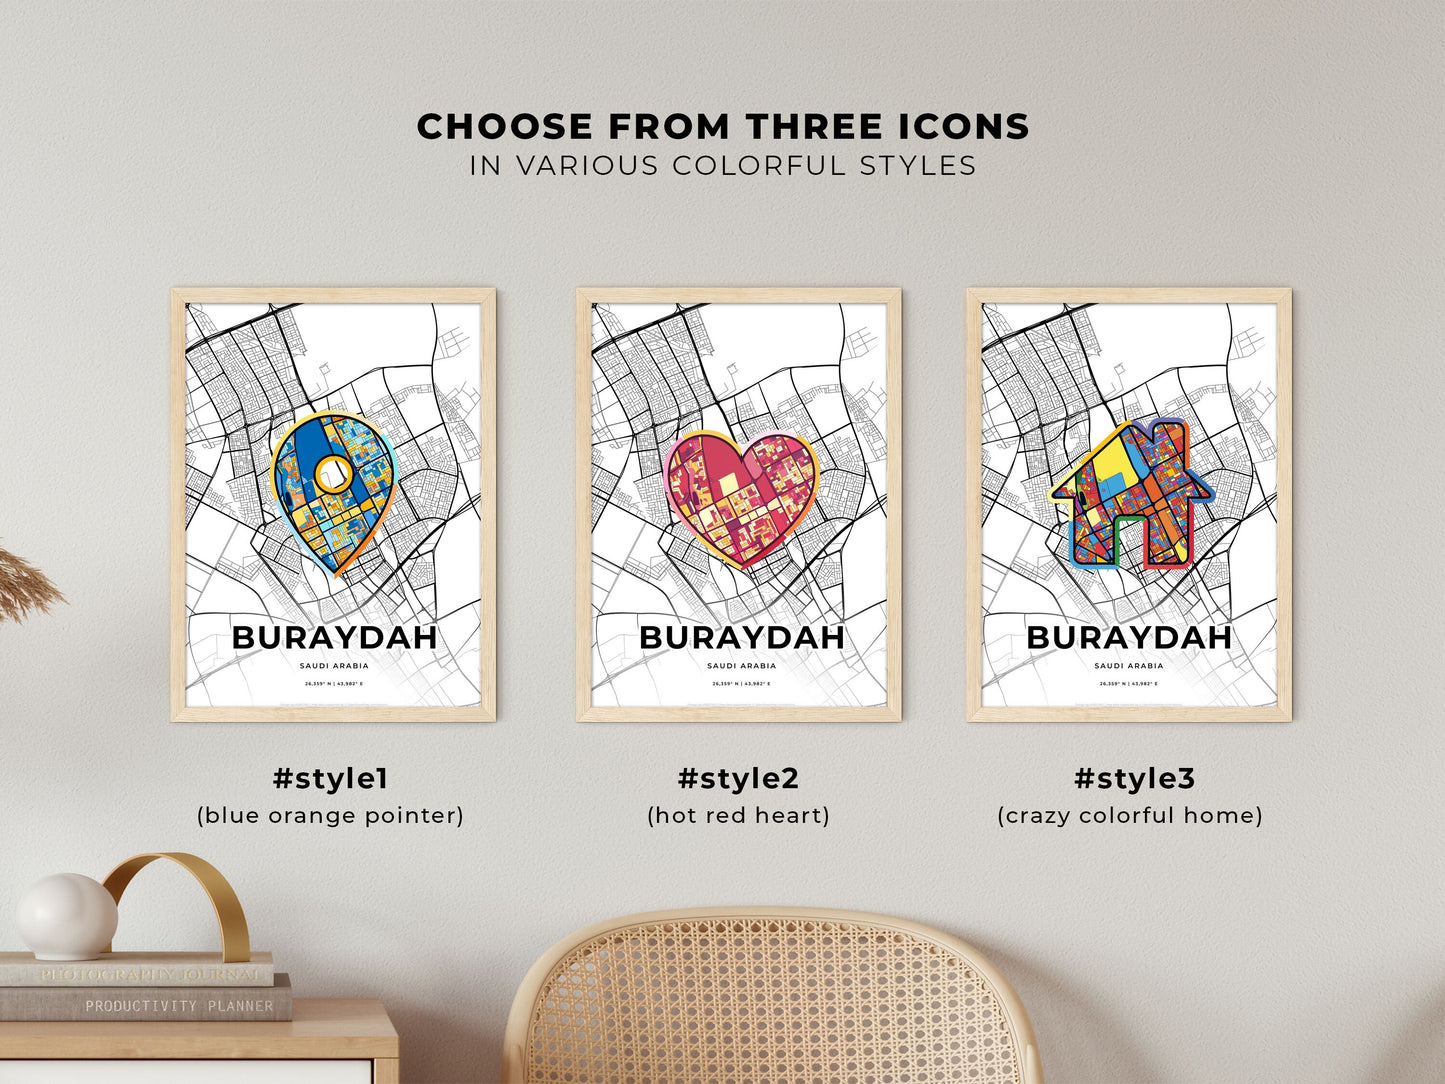 BURAYDAH SAUDI ARABIA minimal art map with a colorful icon. Where it all began, Couple map gift.